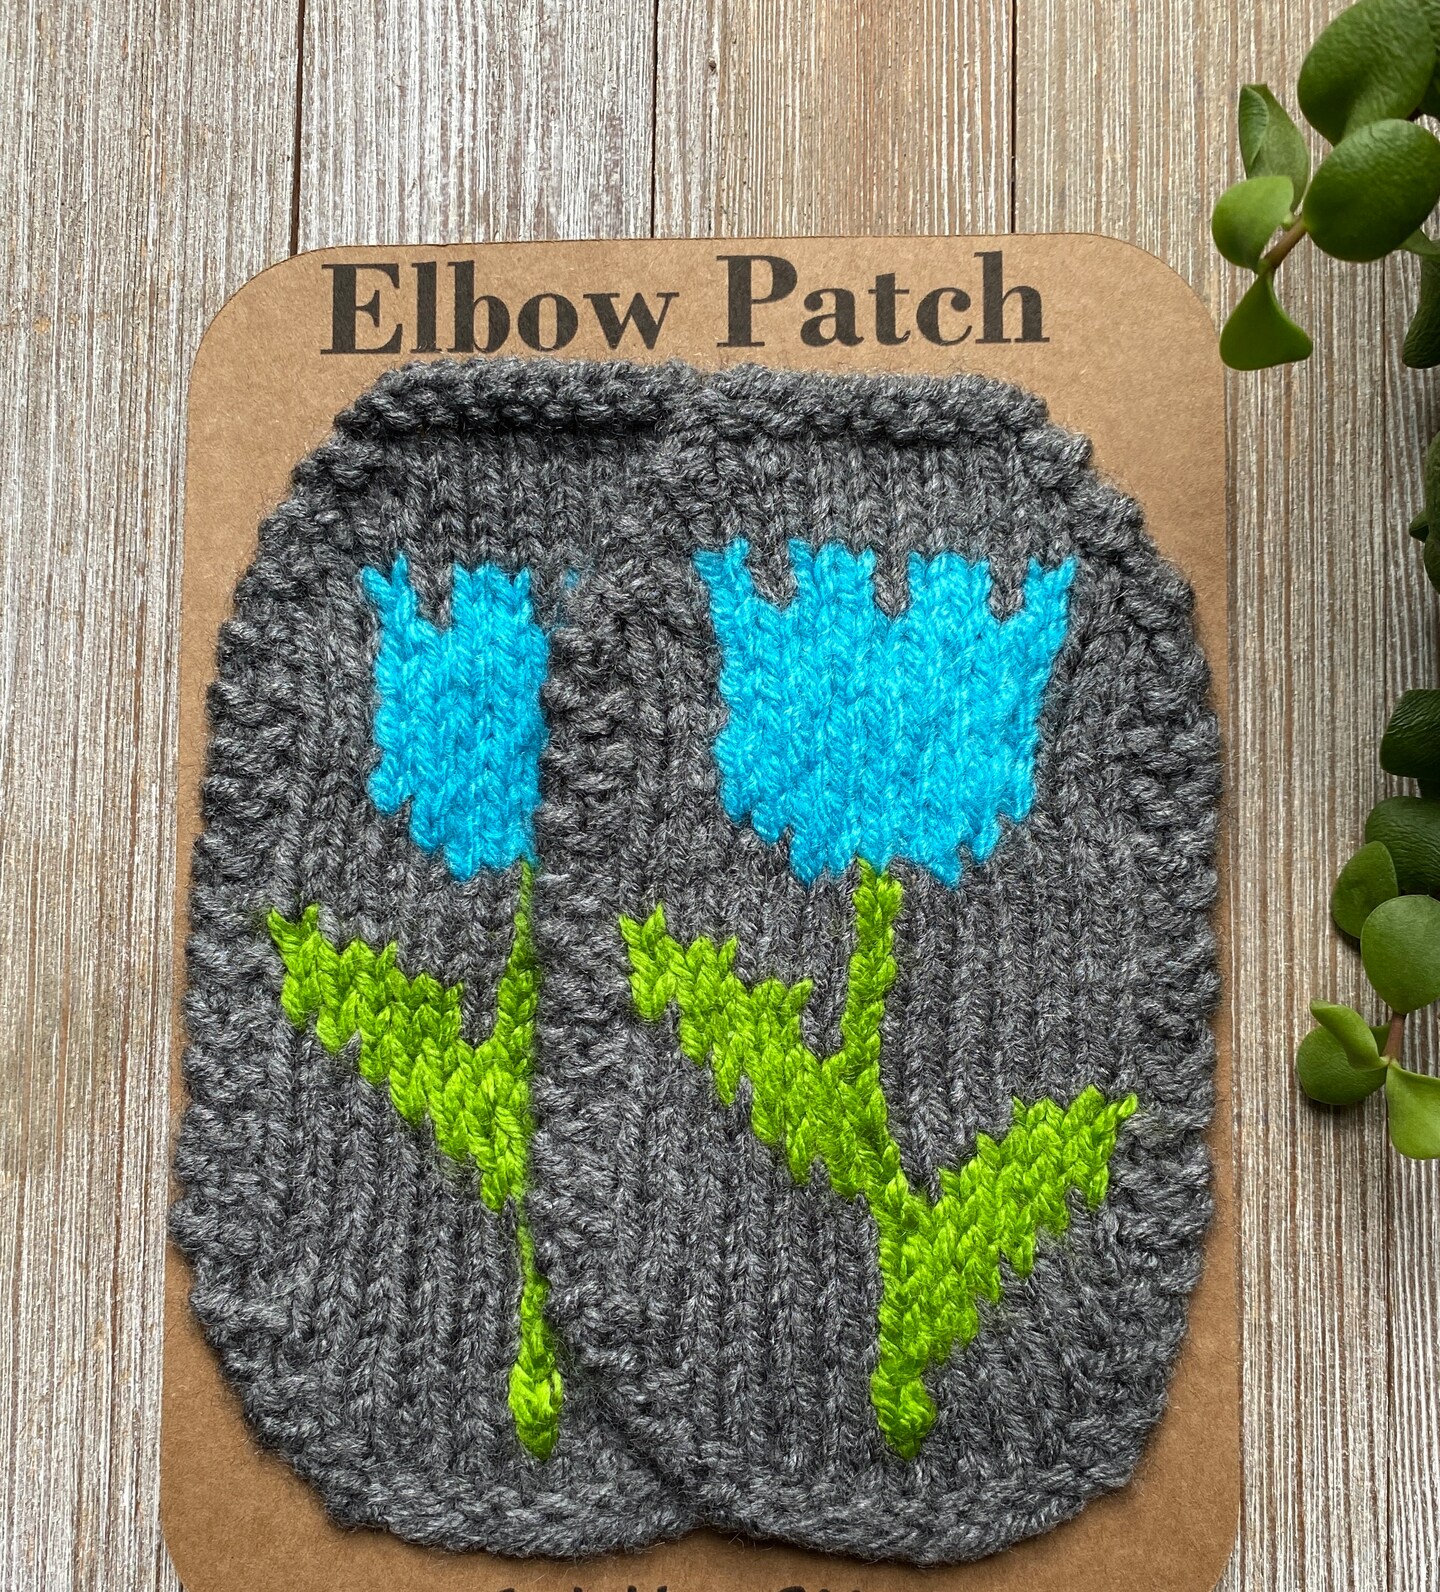 How To Make A Crochet Elbow Patch For Your Sweater